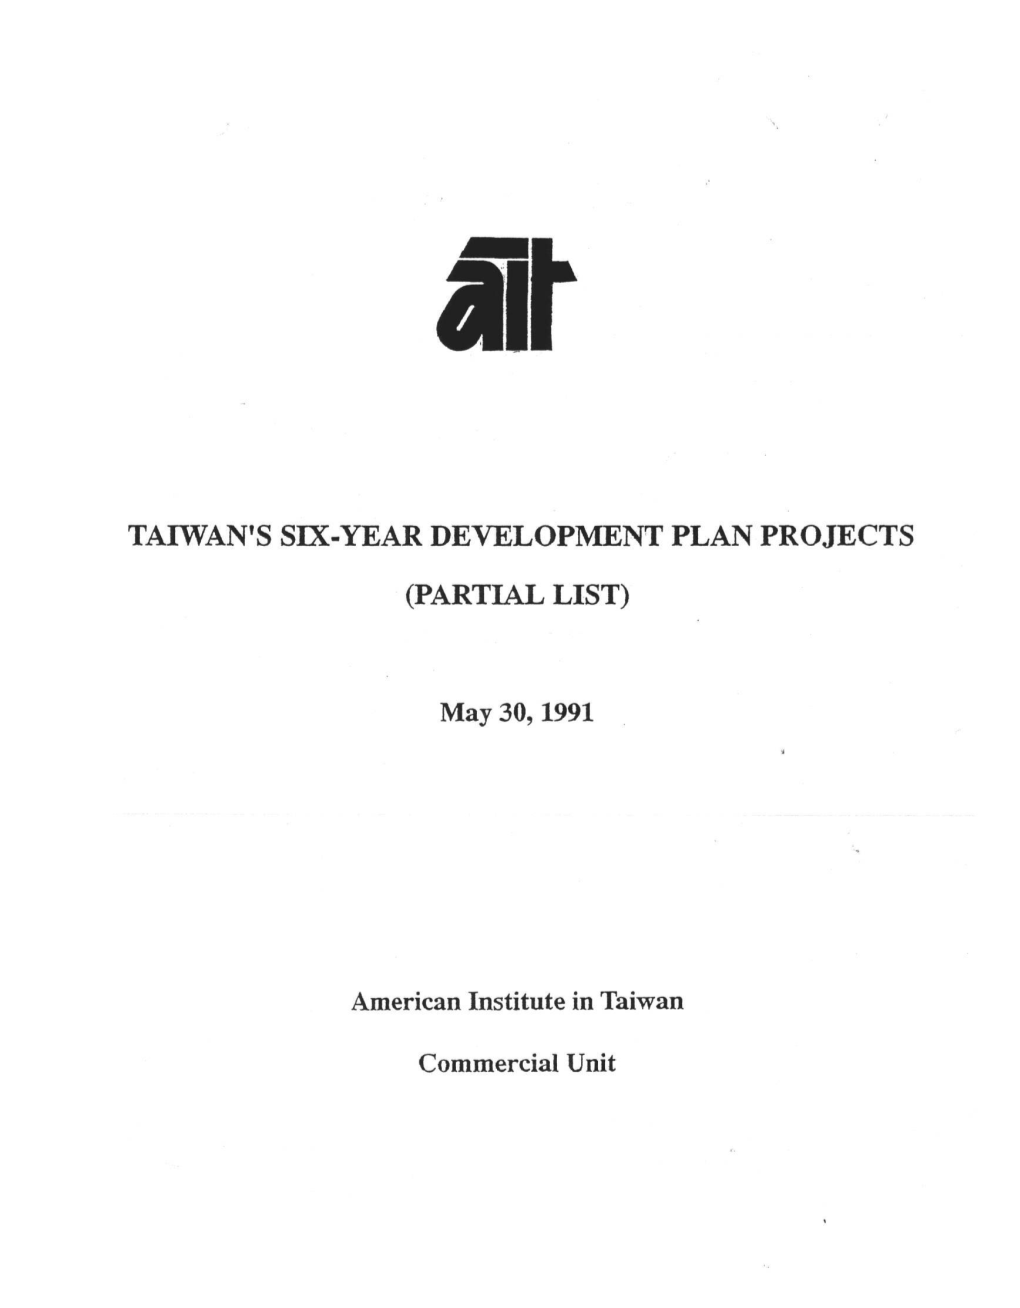 Taiwan's Six-Year Development Plan Projects (Partial List)